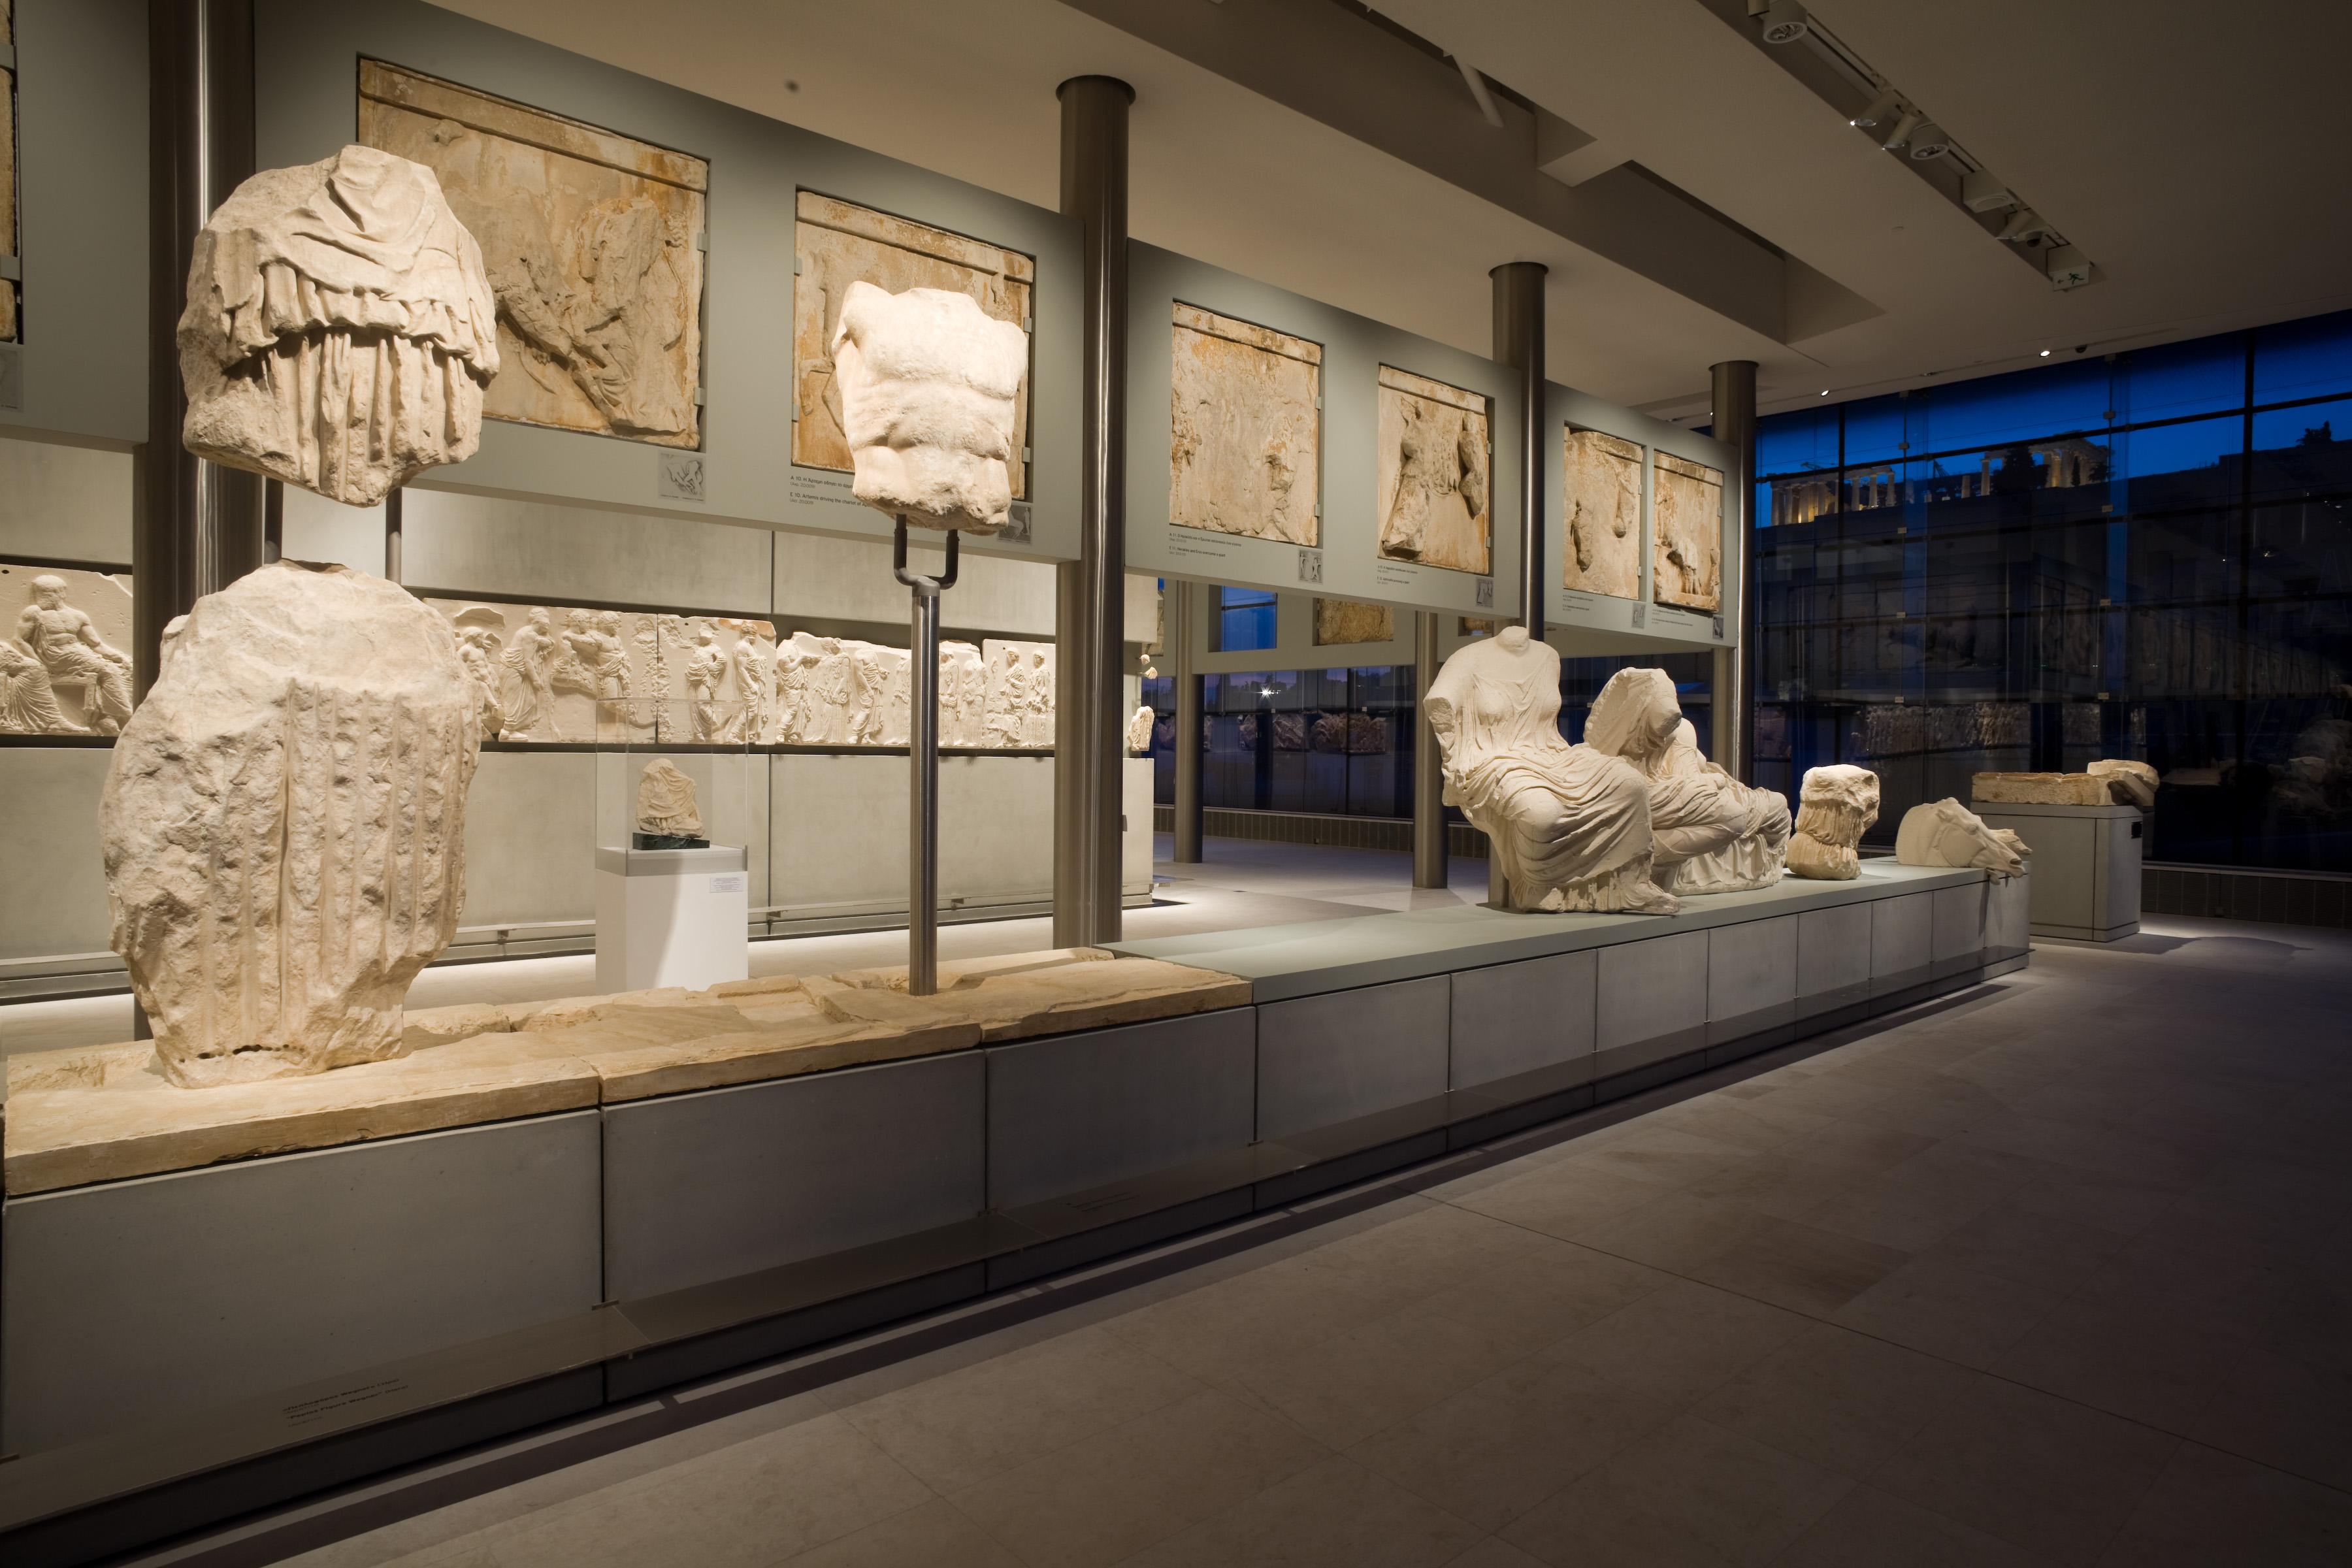 Acropolis of Athens & the Acropolis Museum Tour with optional Skip-the-Line ticket